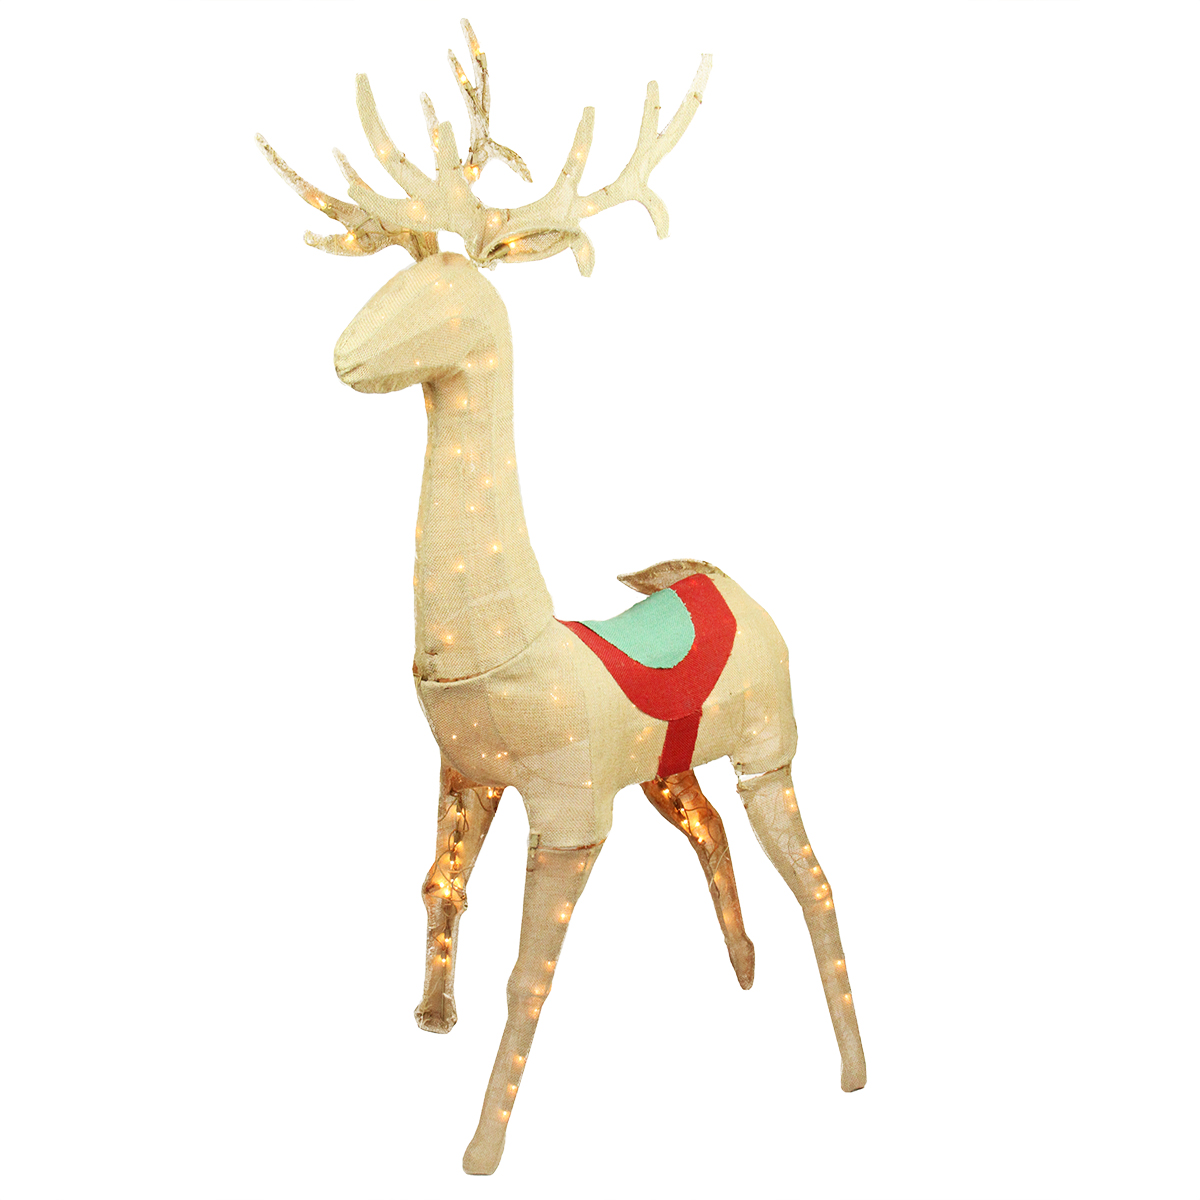 Northlight 60" Beige and Red Pre-Lit Standing Reindeer Christmas Outdoor Decor